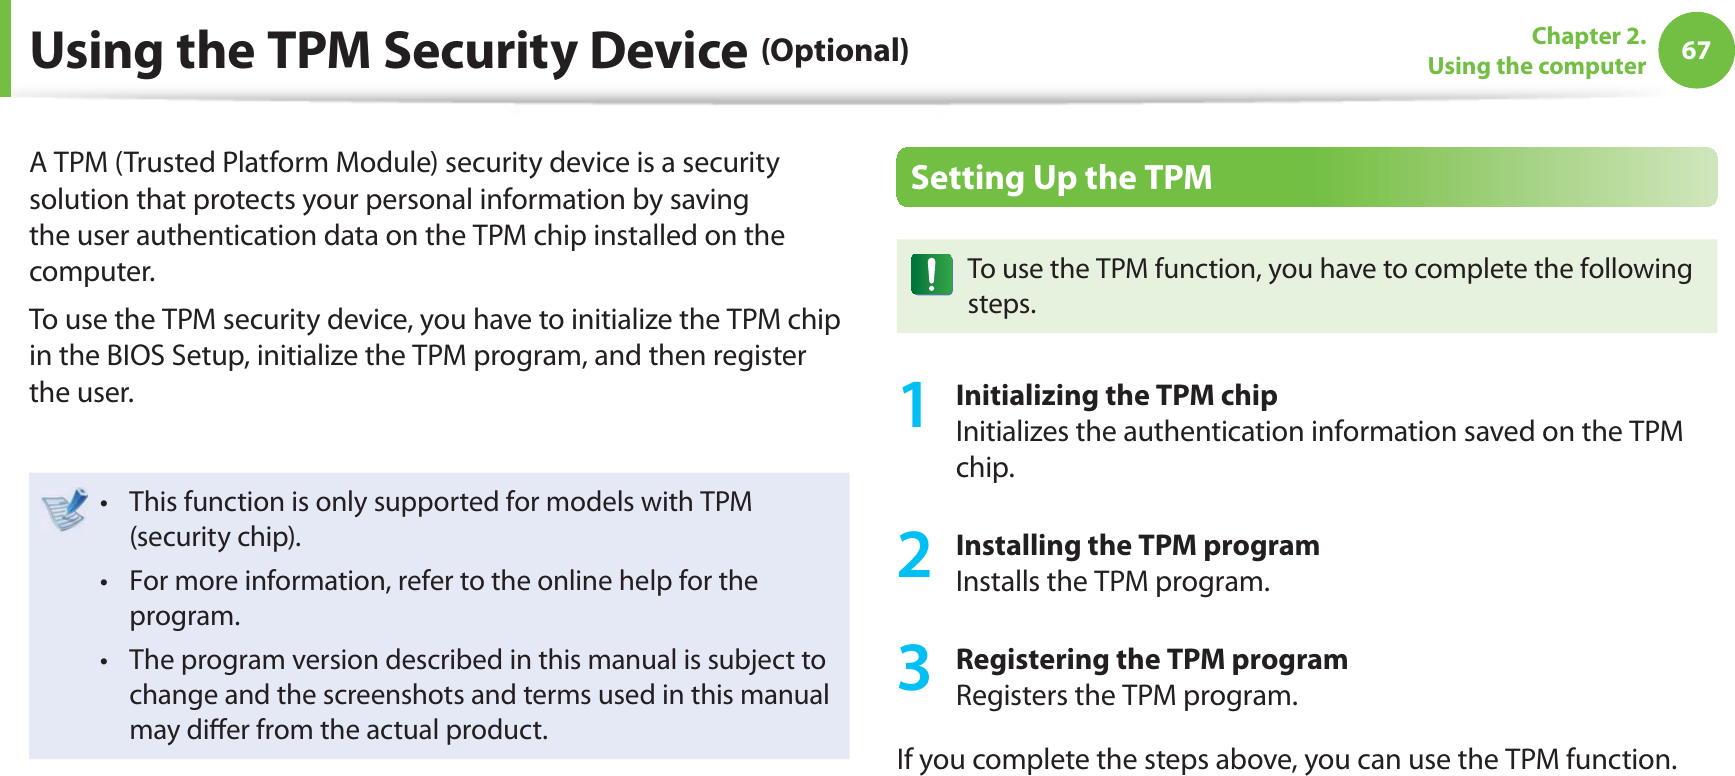 67Chapter 2. Using the computerUsing the TPM Security Device (Optional)A TPM (Trusted Platform Module) security device is a security solution that protects your personal information by saving the user authentication data on the TPM chip installed on the computer.To use the TPM security device, you have to initialize the TPM chip in the BIOS Setup, initialize the TPM program, and then register the user.This function is only supported for models with TPM t (security chip).For more information, refer to the online help for the t program.The program version described in this manual is subject to t change and the screenshots and terms used in this manual may di er from the actual product.Setting Up the TPMTo use the TPM function, you have to complete the following steps.1 Initializing the TPM chipInitializes the authentication information saved on the TPM chip.2 Installing the TPM programInstalls the TPM program.3 Registering the TPM programRegisters the TPM program. If you complete the steps above, you can use the TPM function.